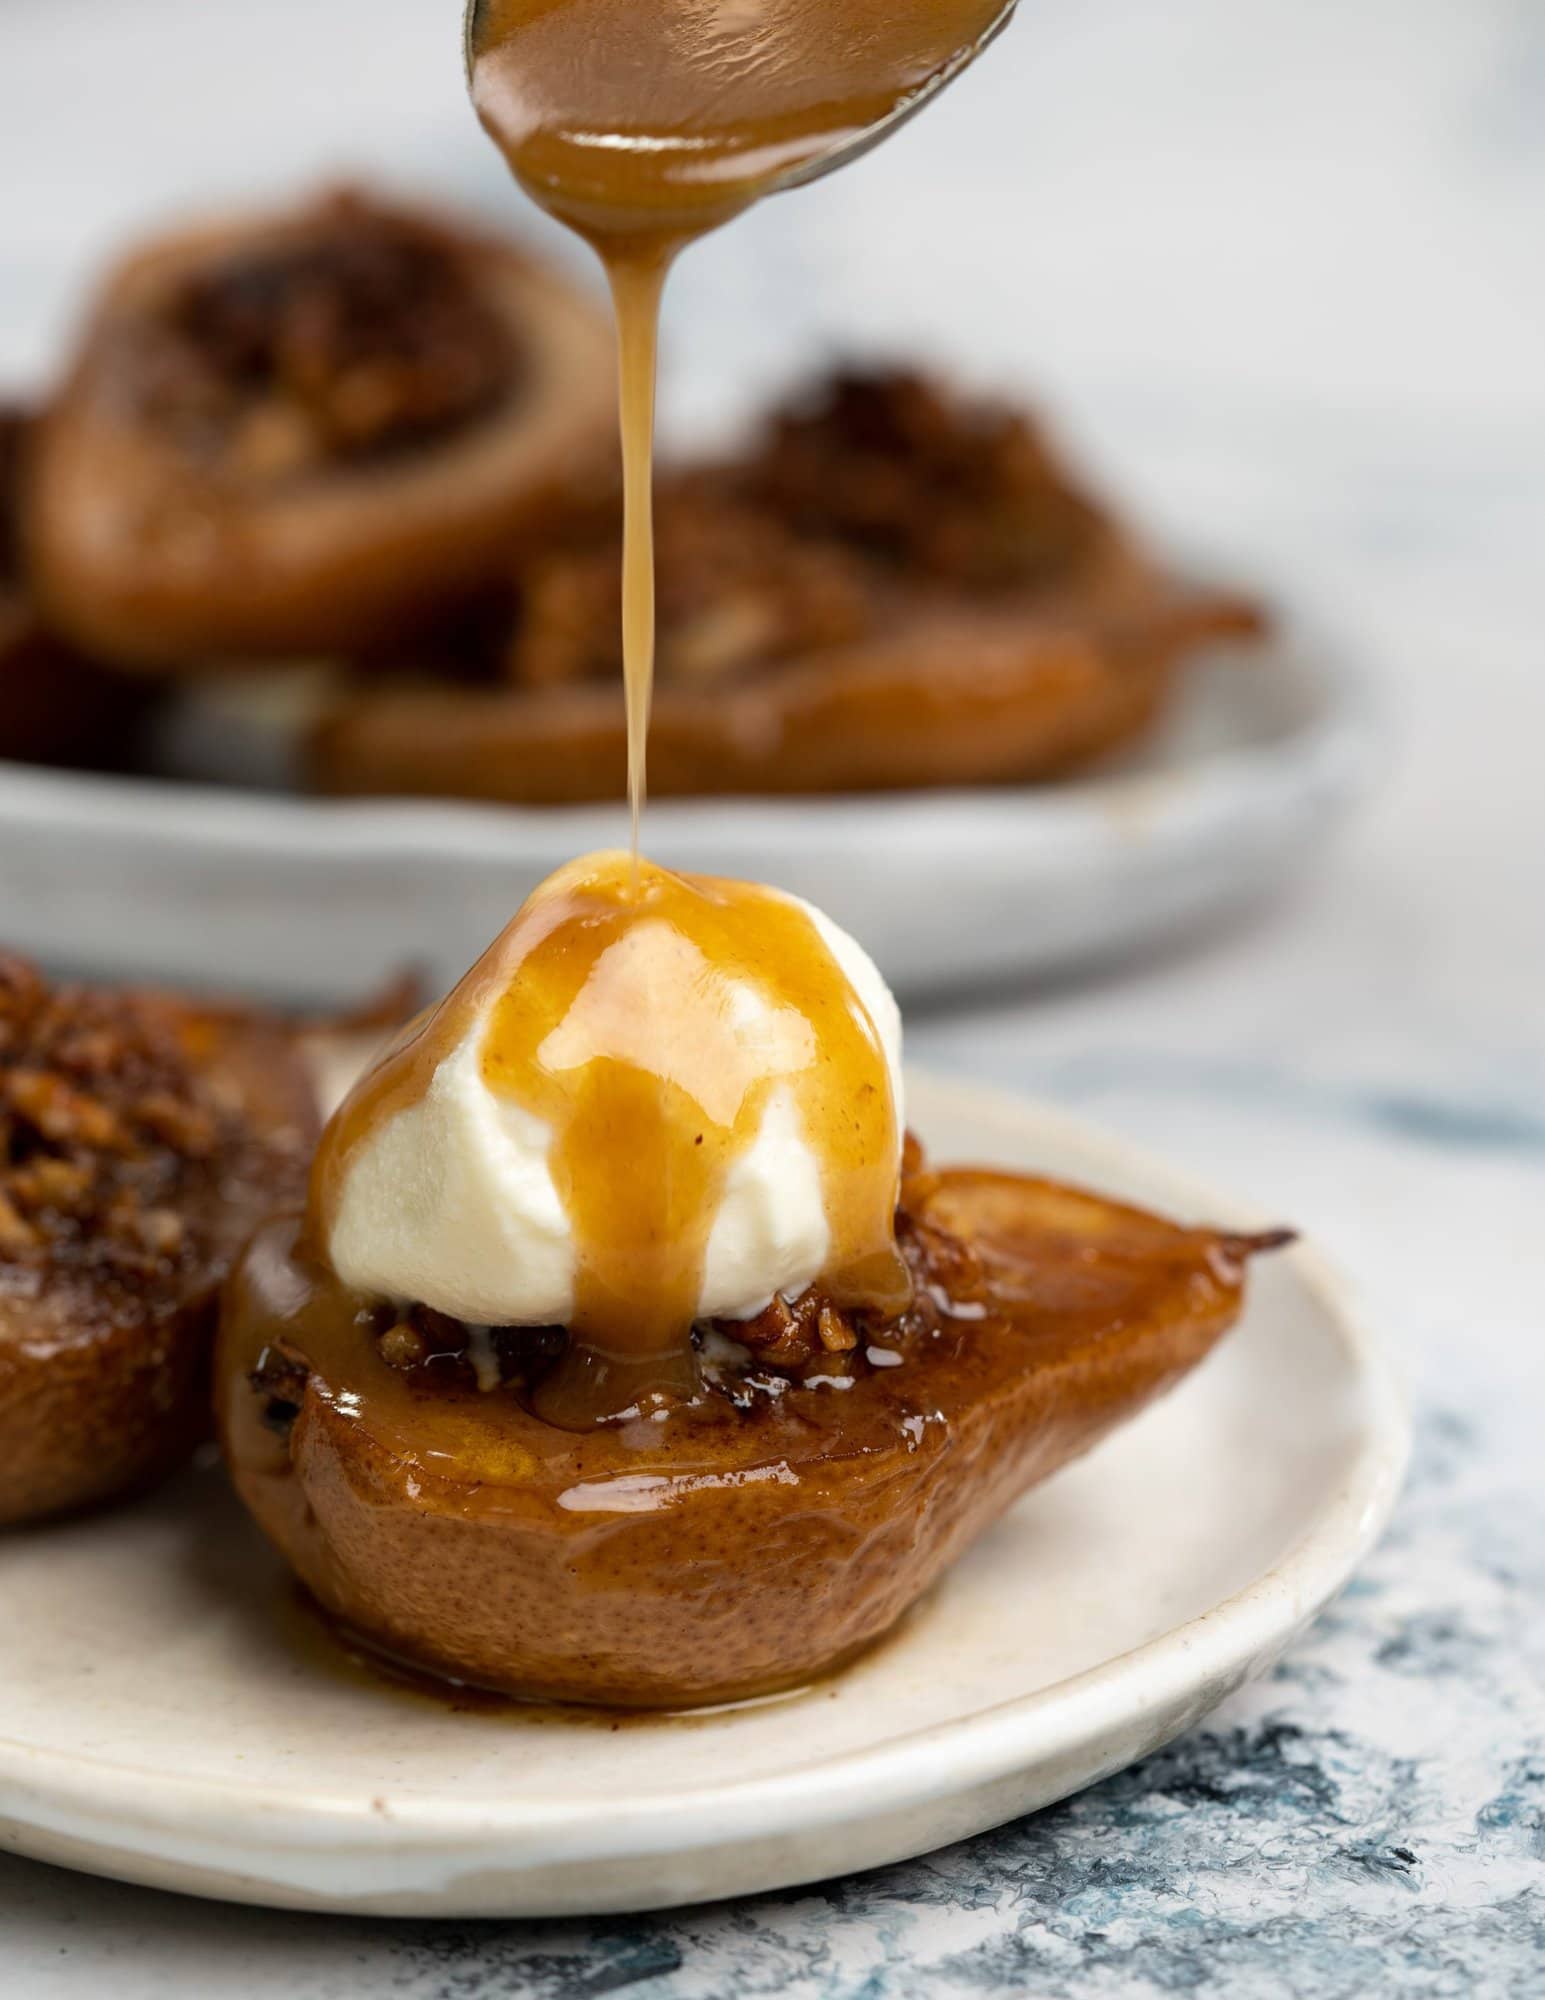 Caramelized sauce drizzled over ice cream placed on a baked pear